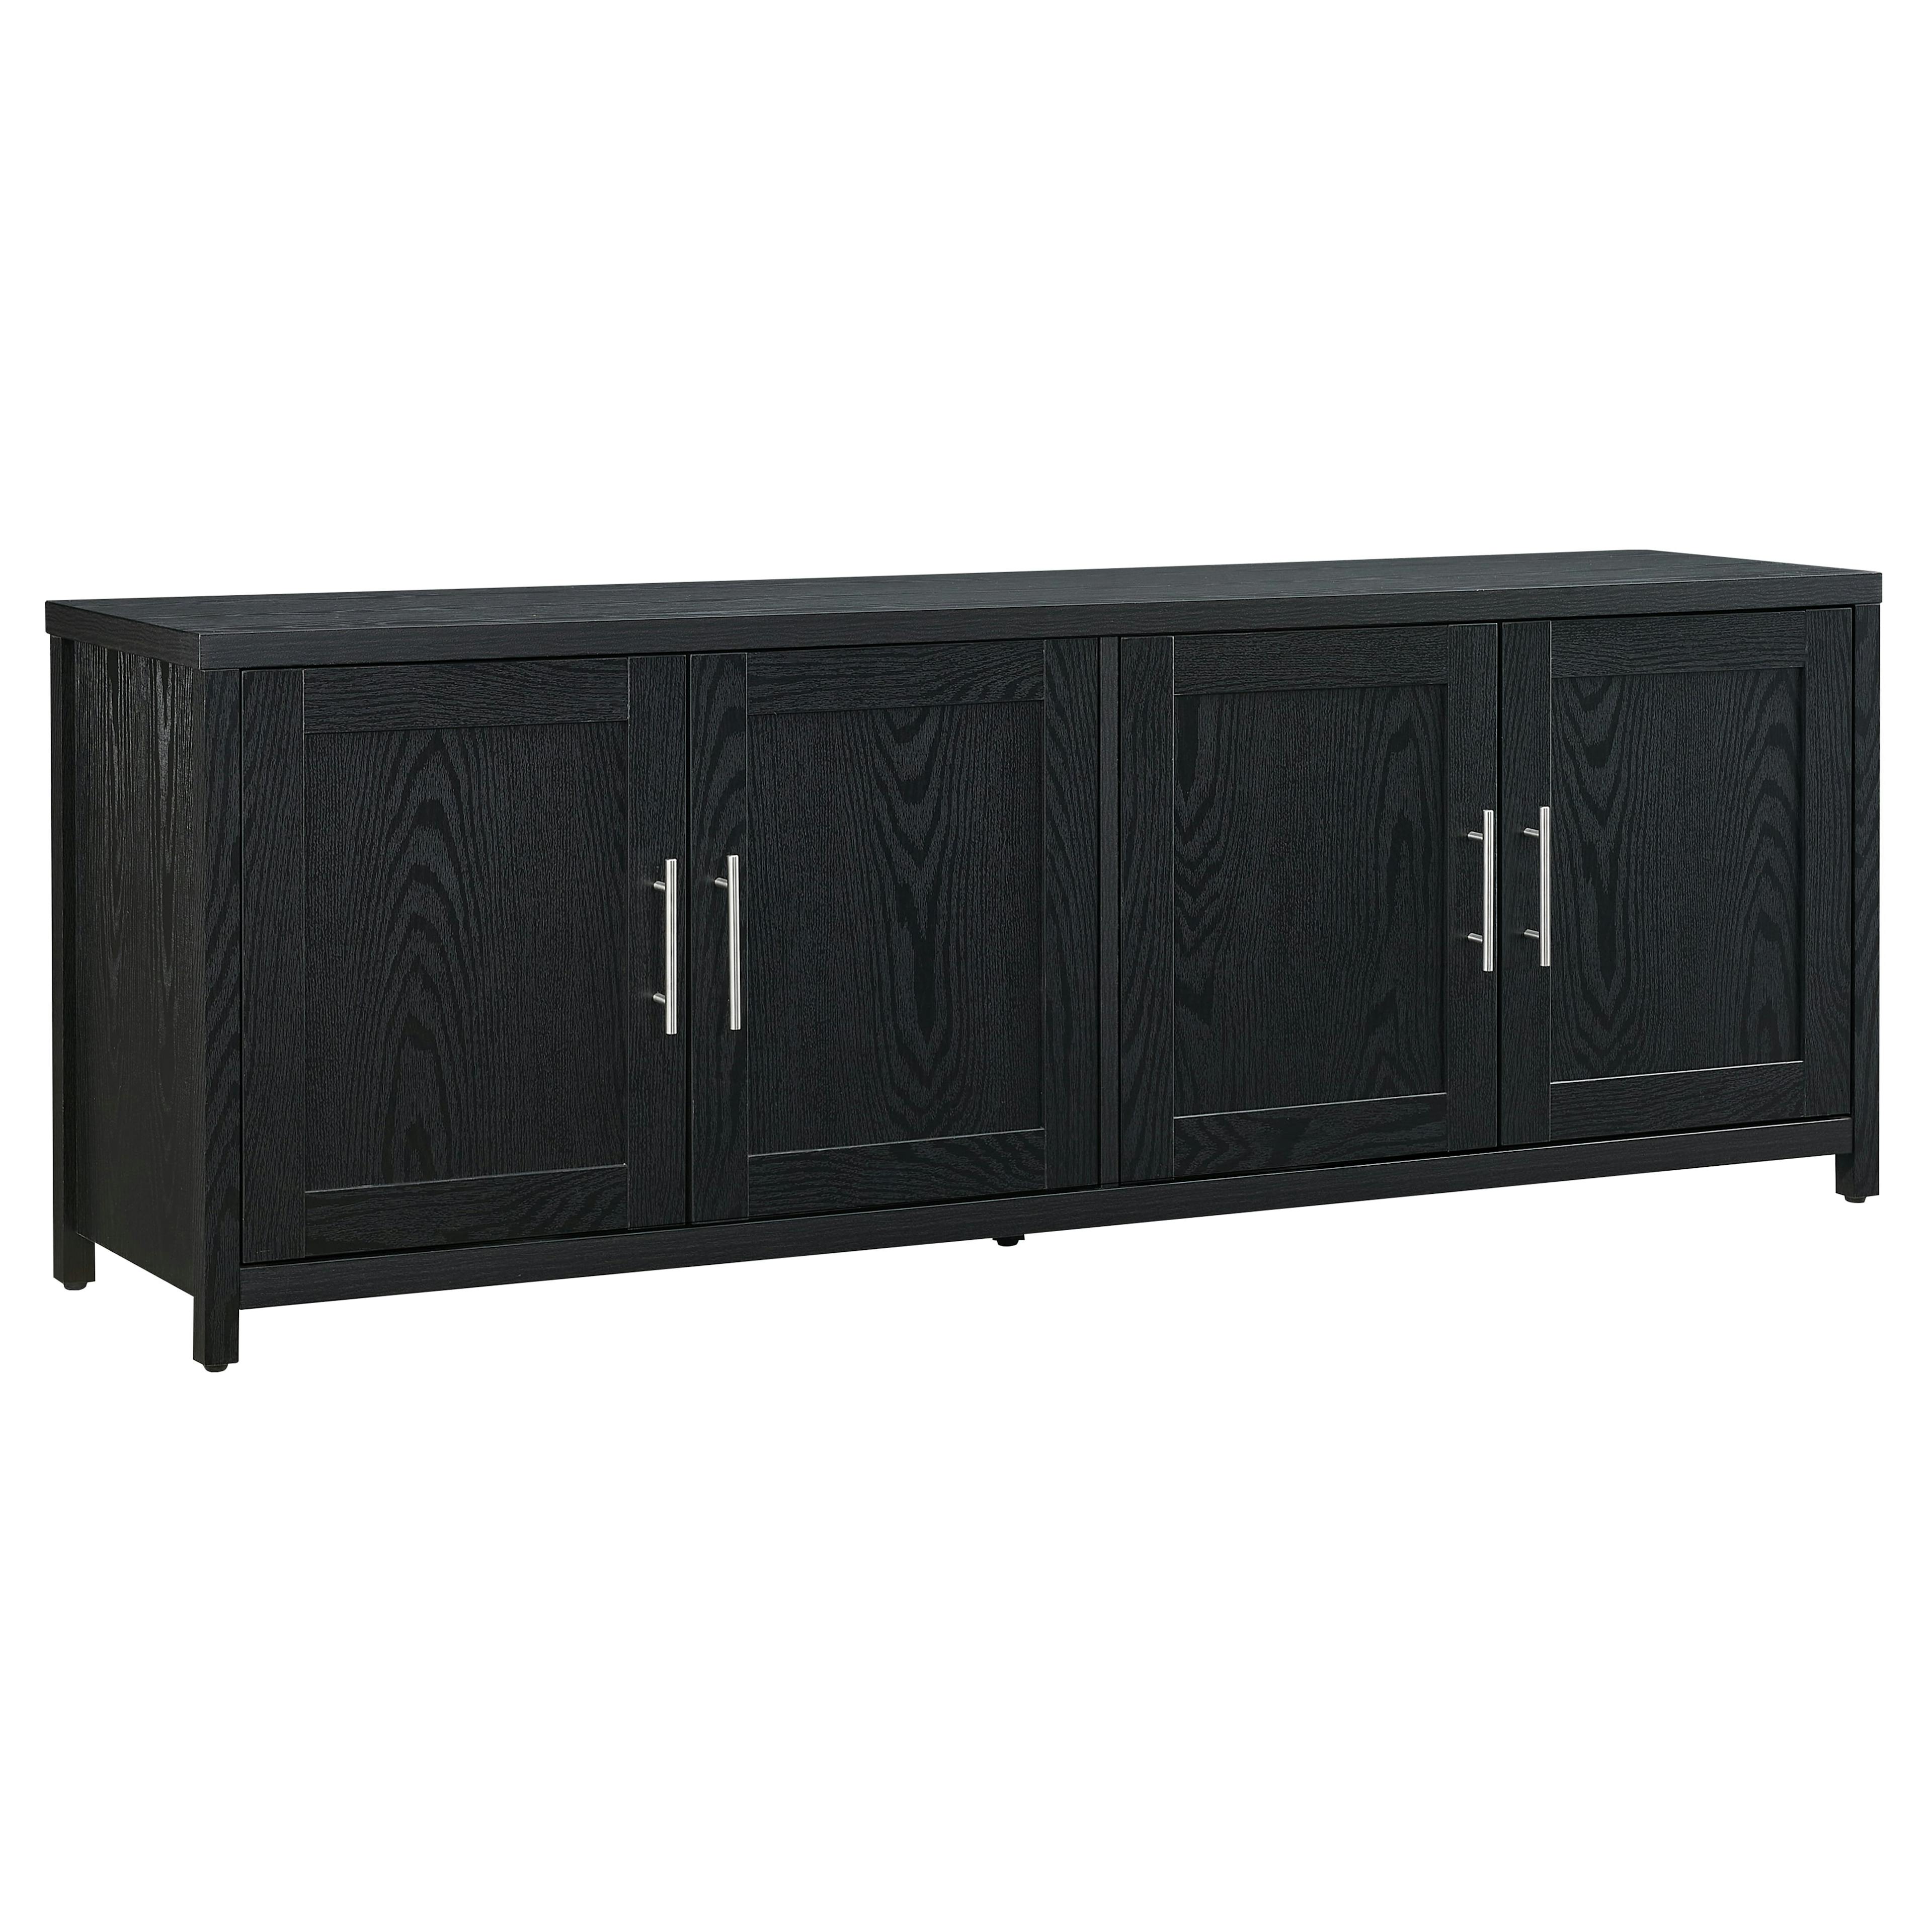 Transitional Black Grain MDF TV Stand with Enclosed Cabinets